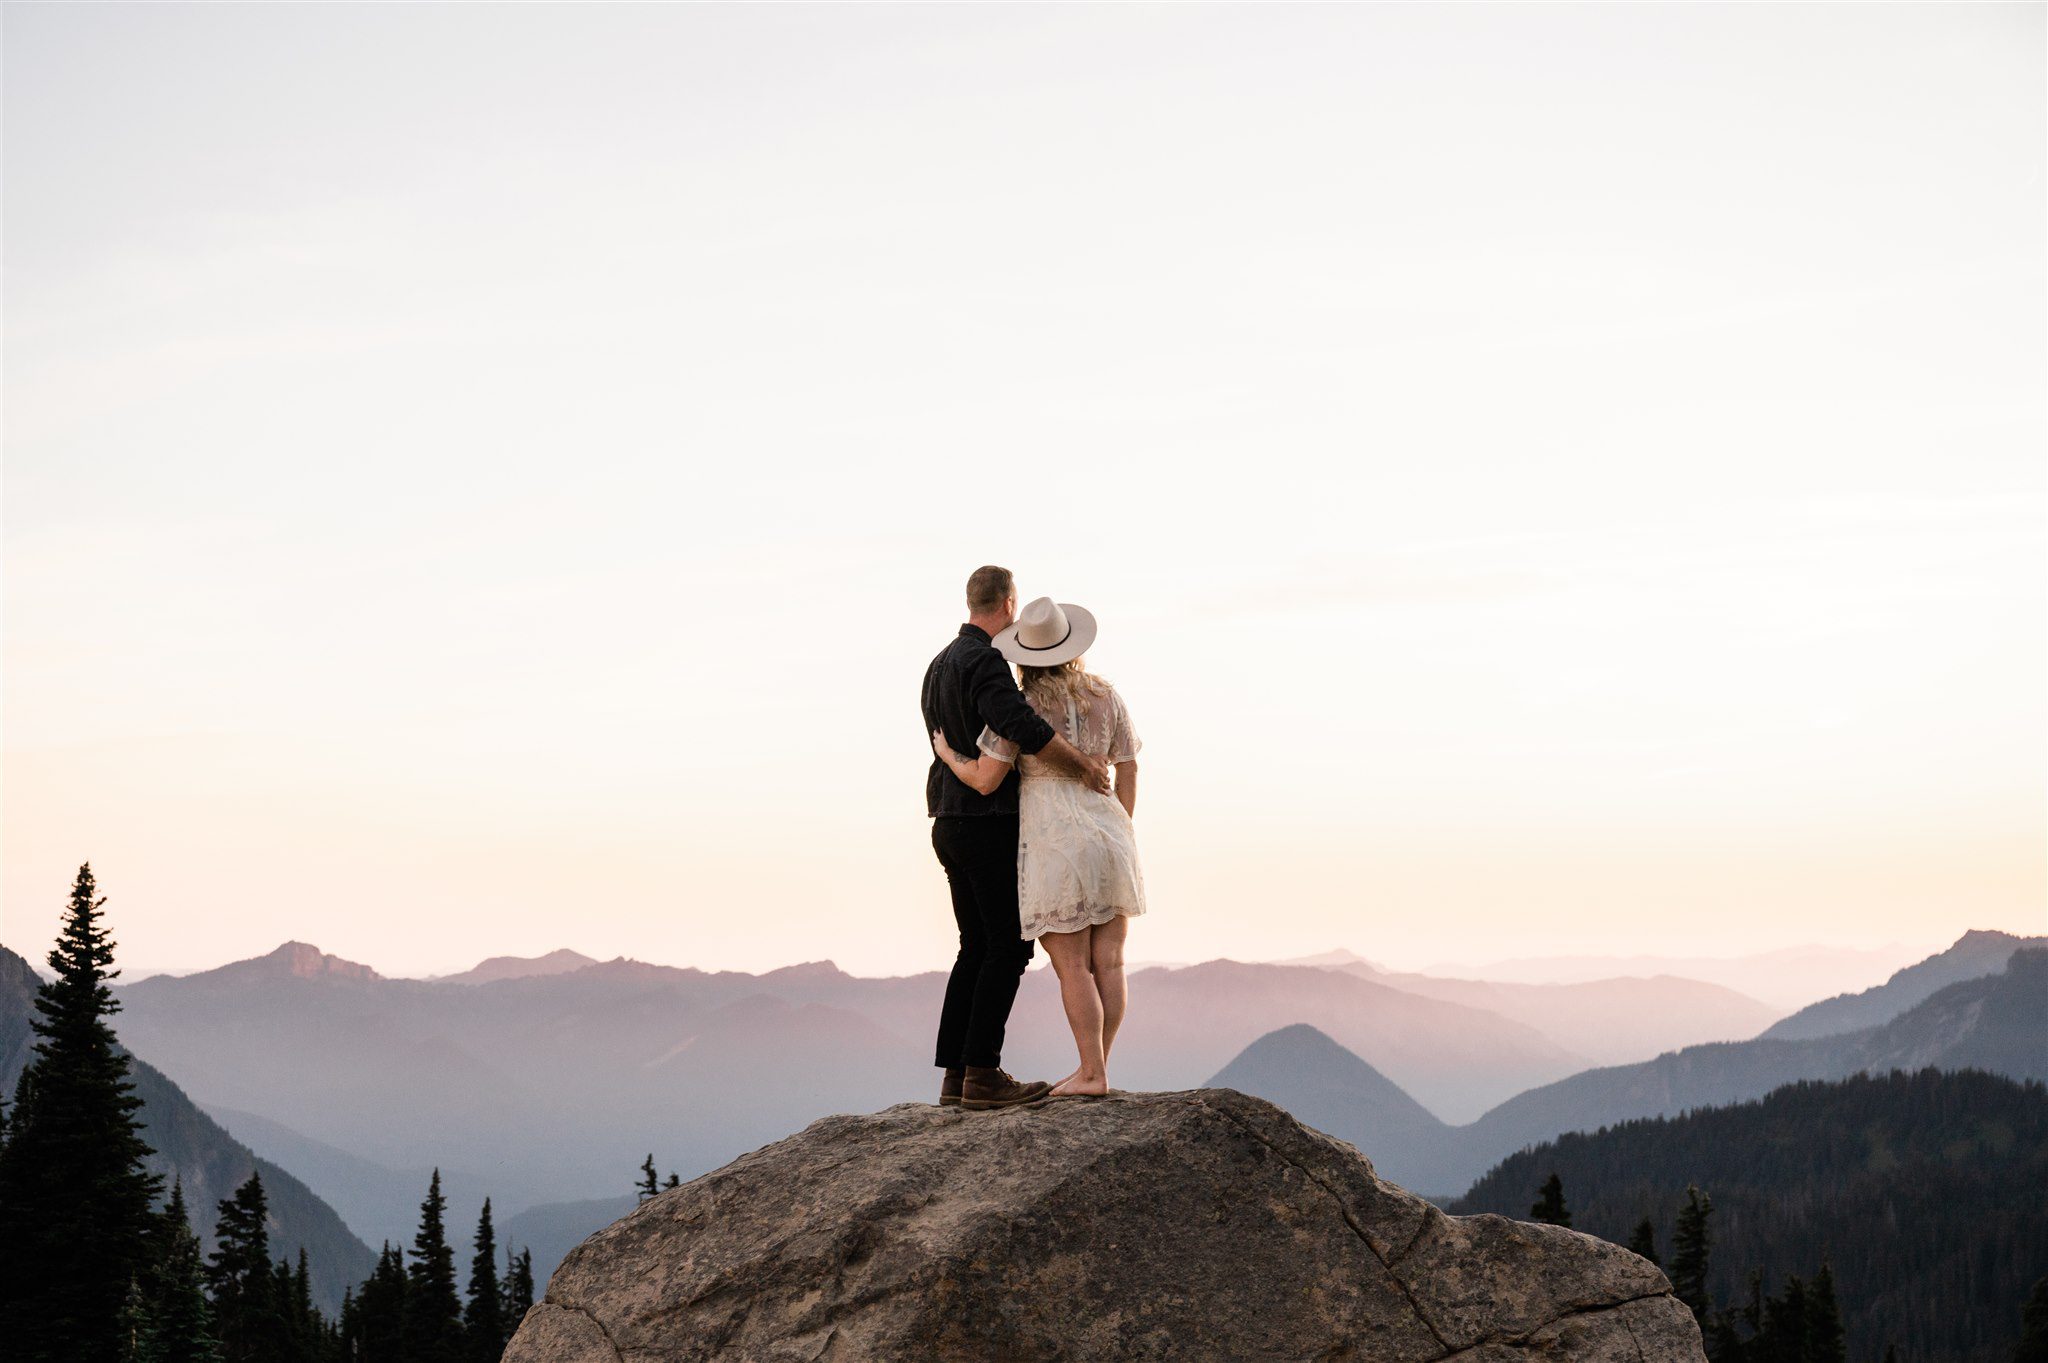 Couple hugging at sunset